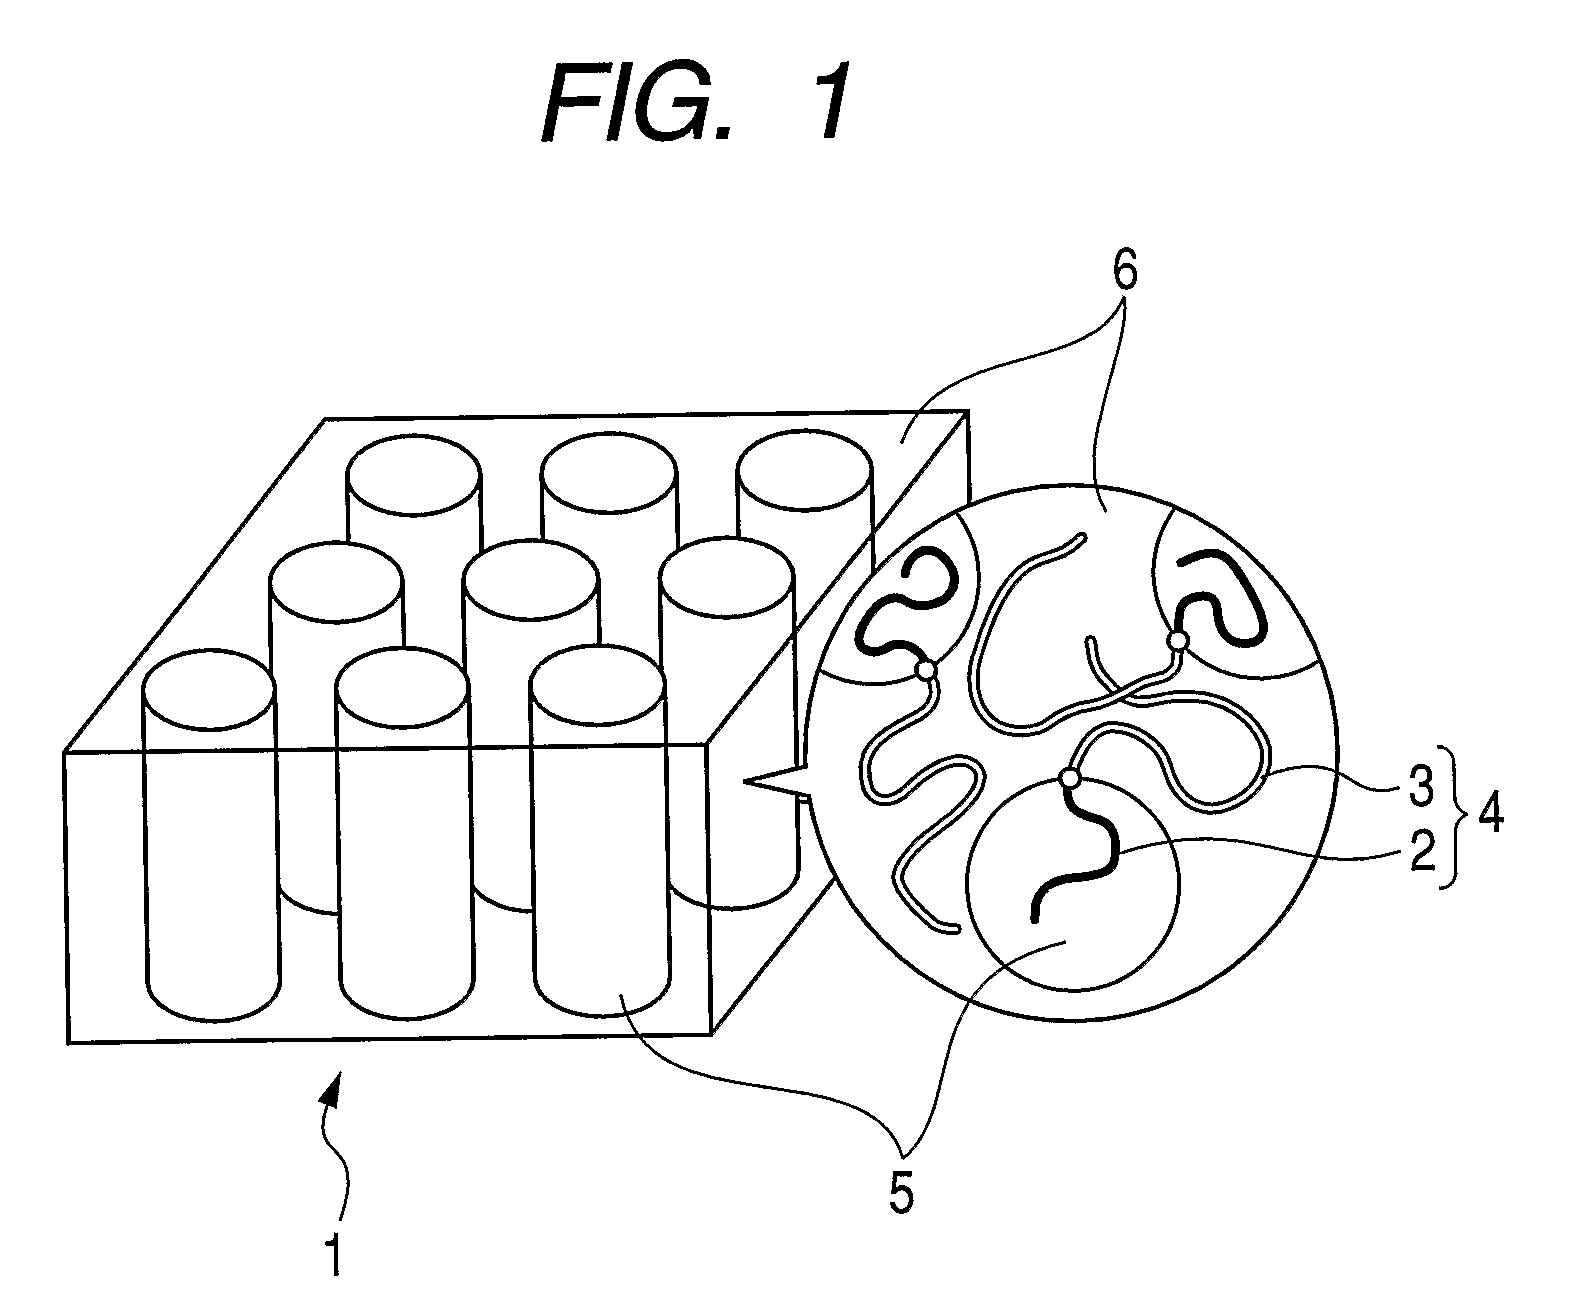 Polymer electrolyte composite film, membrane-electrode assembly and fuel cell